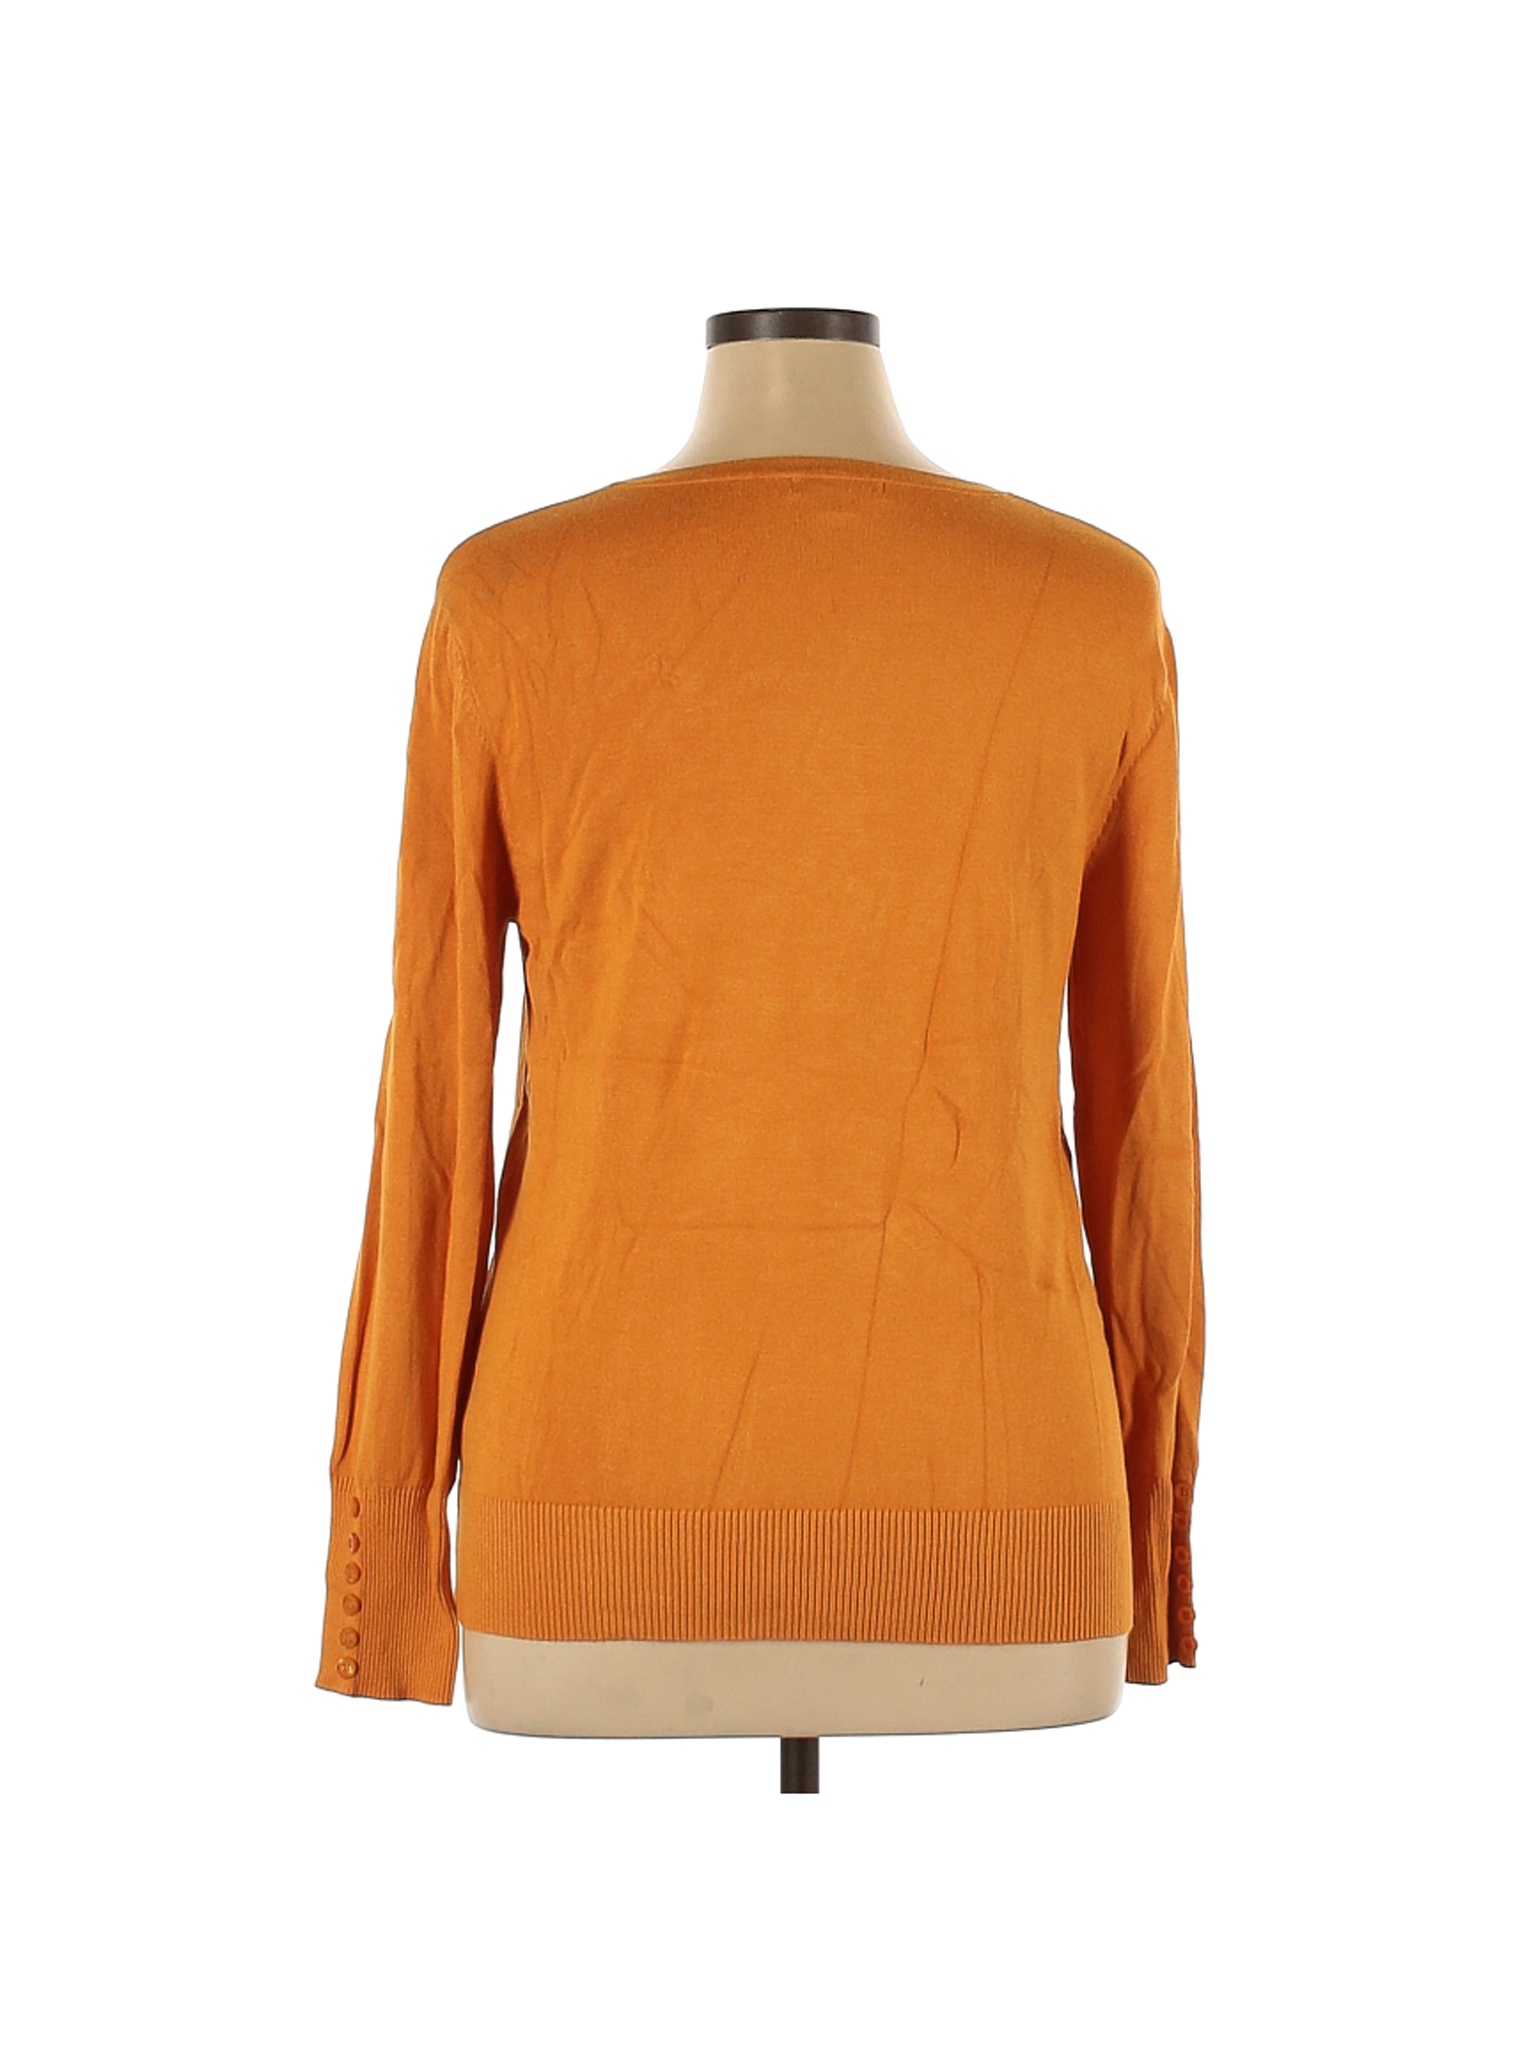 Zenana Outfitters Solid Orange Long Sleeve Top Size XL - 50% off